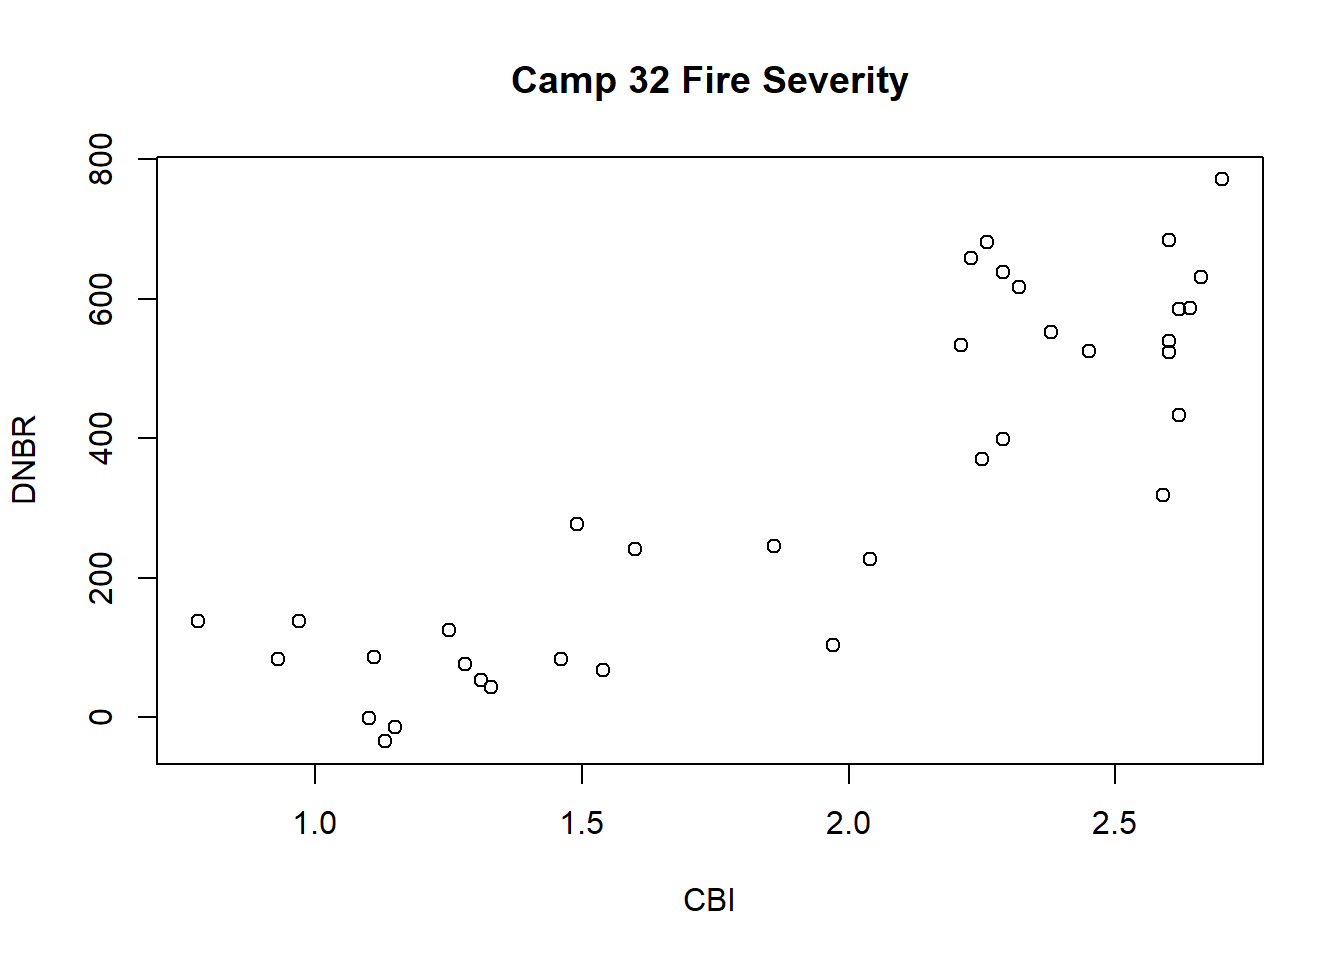 Scatterplot of the CBI and DNBR fire severity indices with axis labels and title.